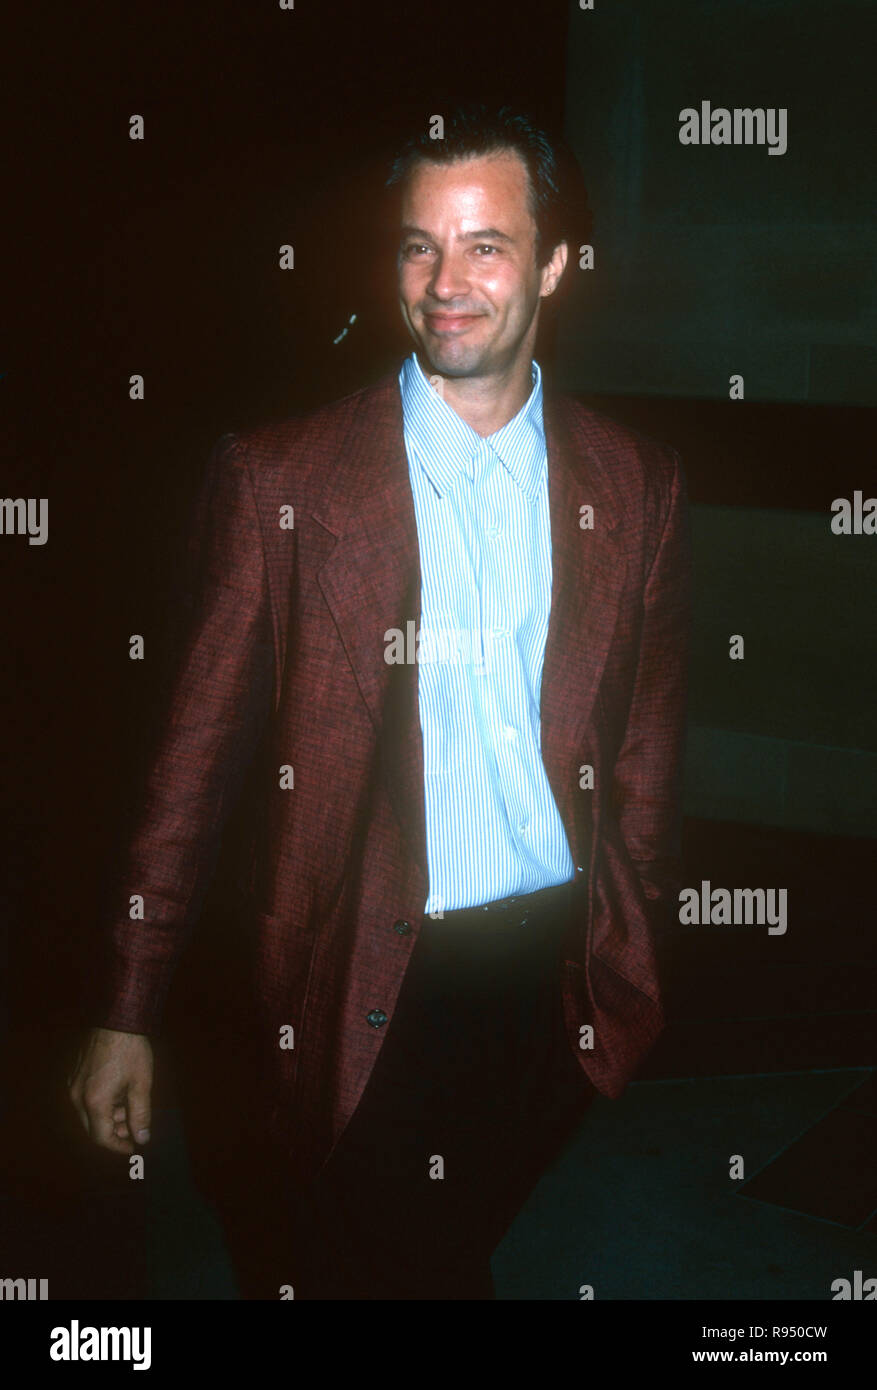 WESTWOOD, CA - MAY 10: Actor Philip Casnoff attends 'Much Ado About Nothing' Westwood Premiere on May 10, 1993 at the Mann National Theatre in Westwood, California. Photo by Barry King/Alamy Stock Photo Stock Photo